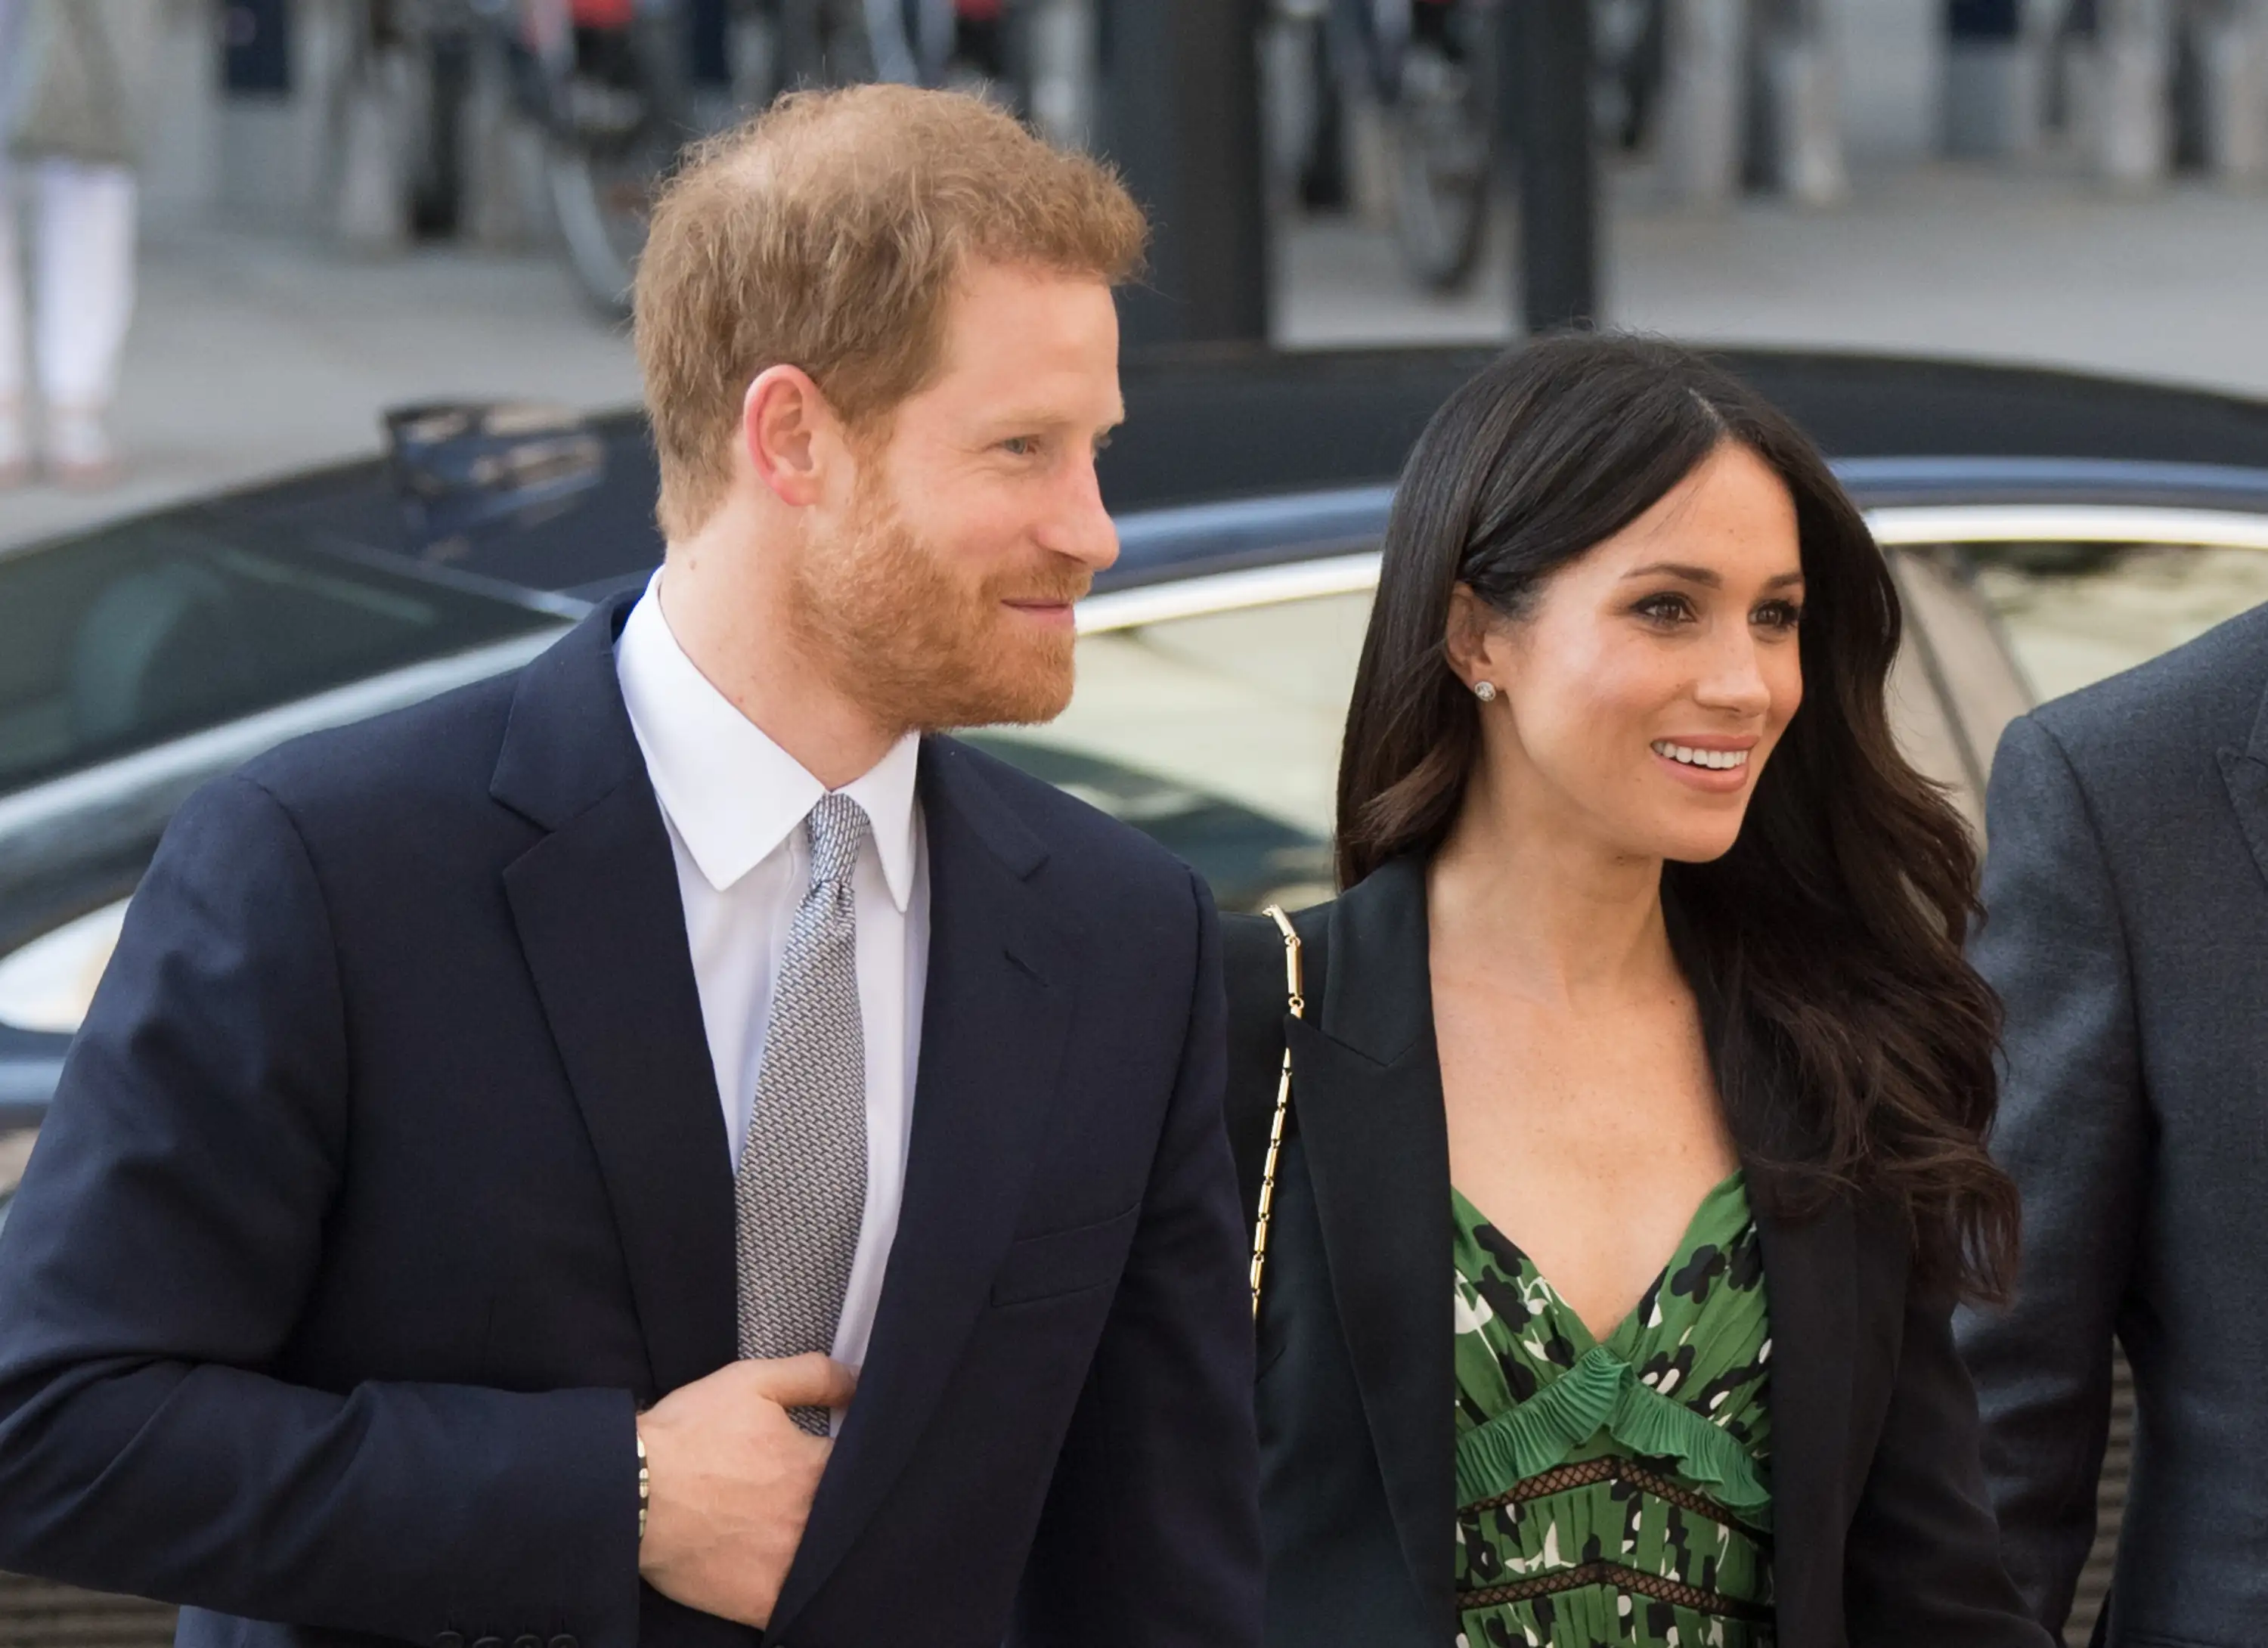 Prince Harry And Ms. Meghan Markle Attend Invictus Games Reception